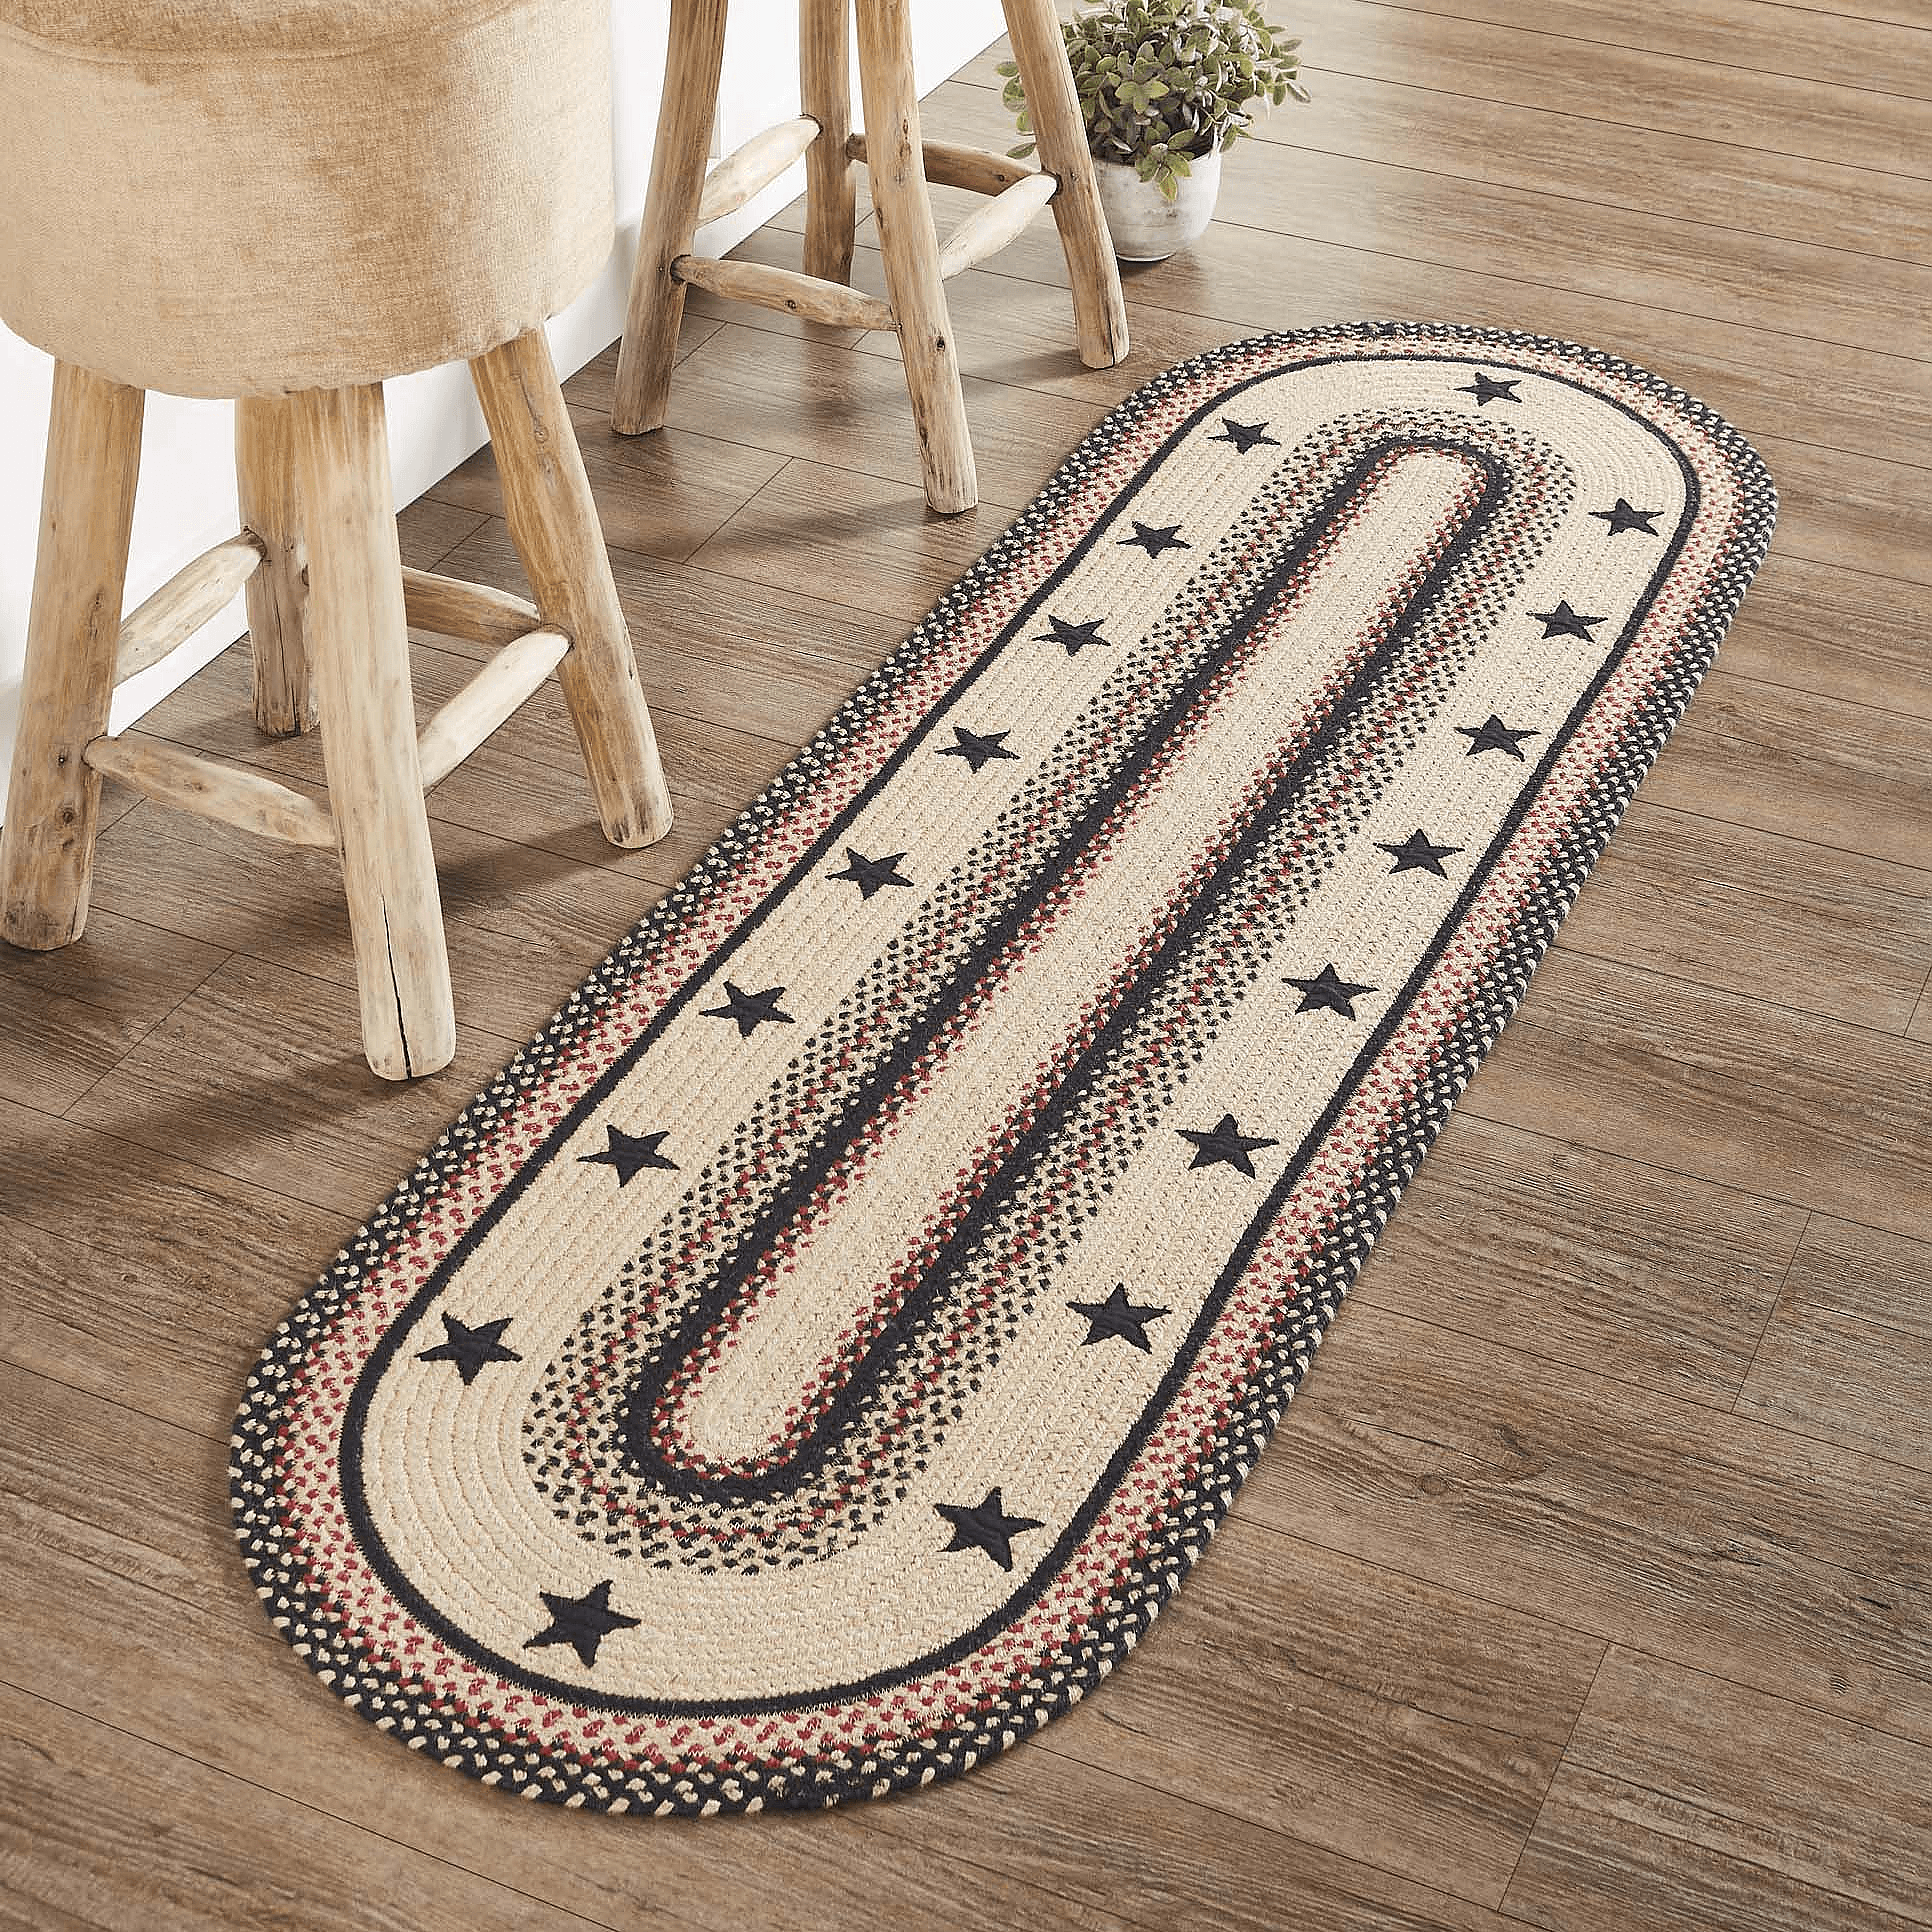 Colonial Star Oval Braided Rug 22x72 Runner - with Pad